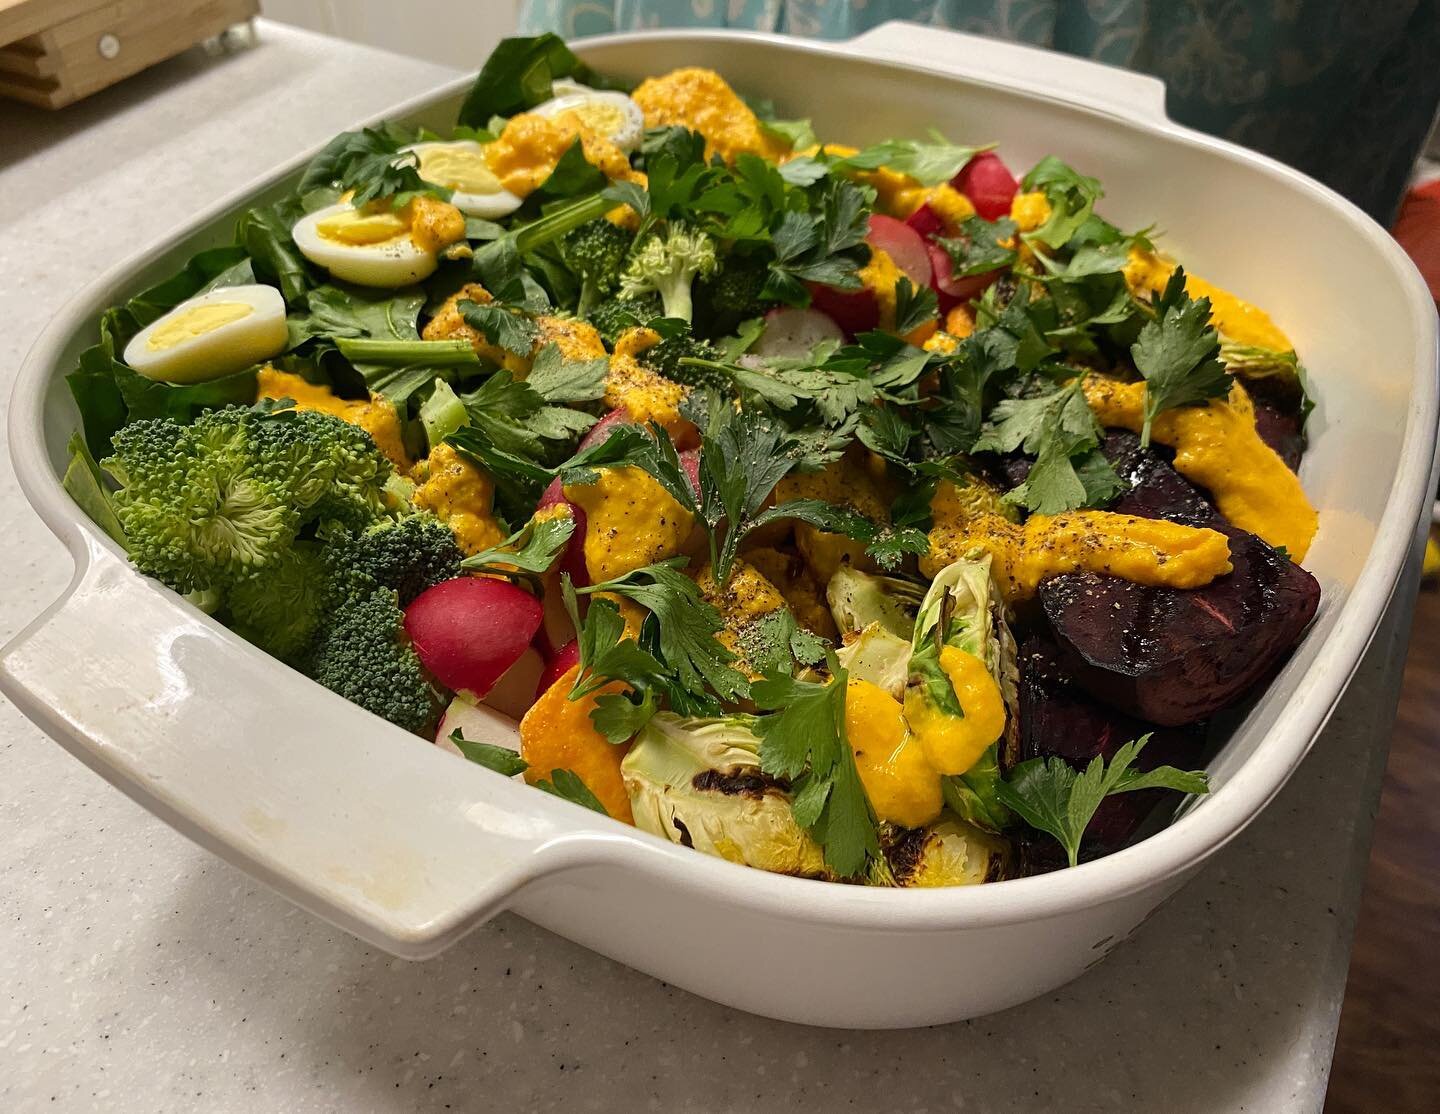 We've been craving colourful veggies in our house. I think we made something really pretty and very satisfying. Also, I think we just found our new favourite salad dressing....and I don't think I'll be able to not have it in our house for the rest of